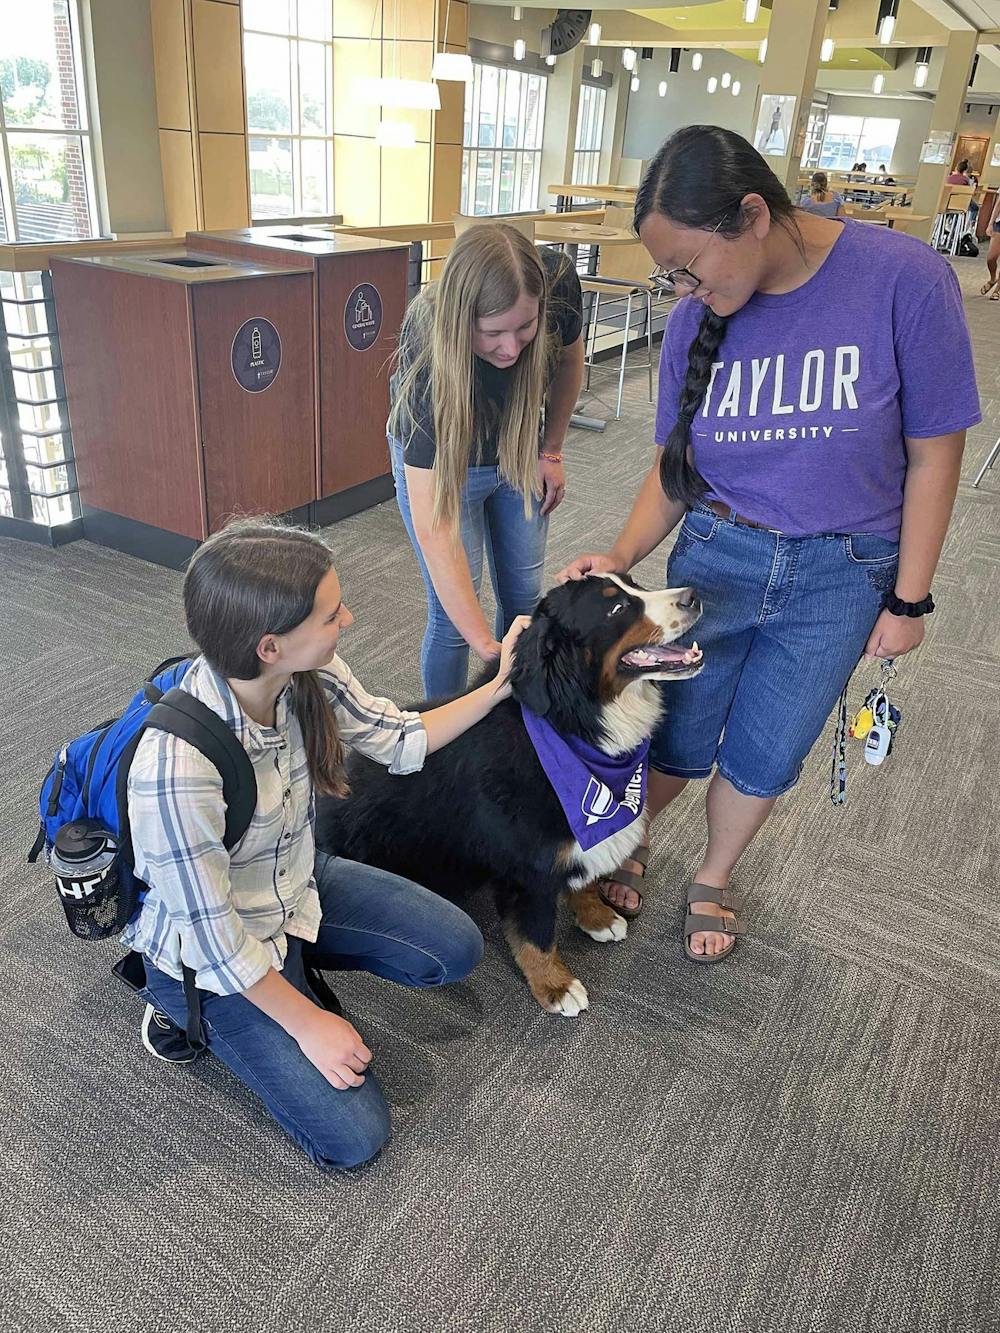 Therapy dogs alleviate stress among students